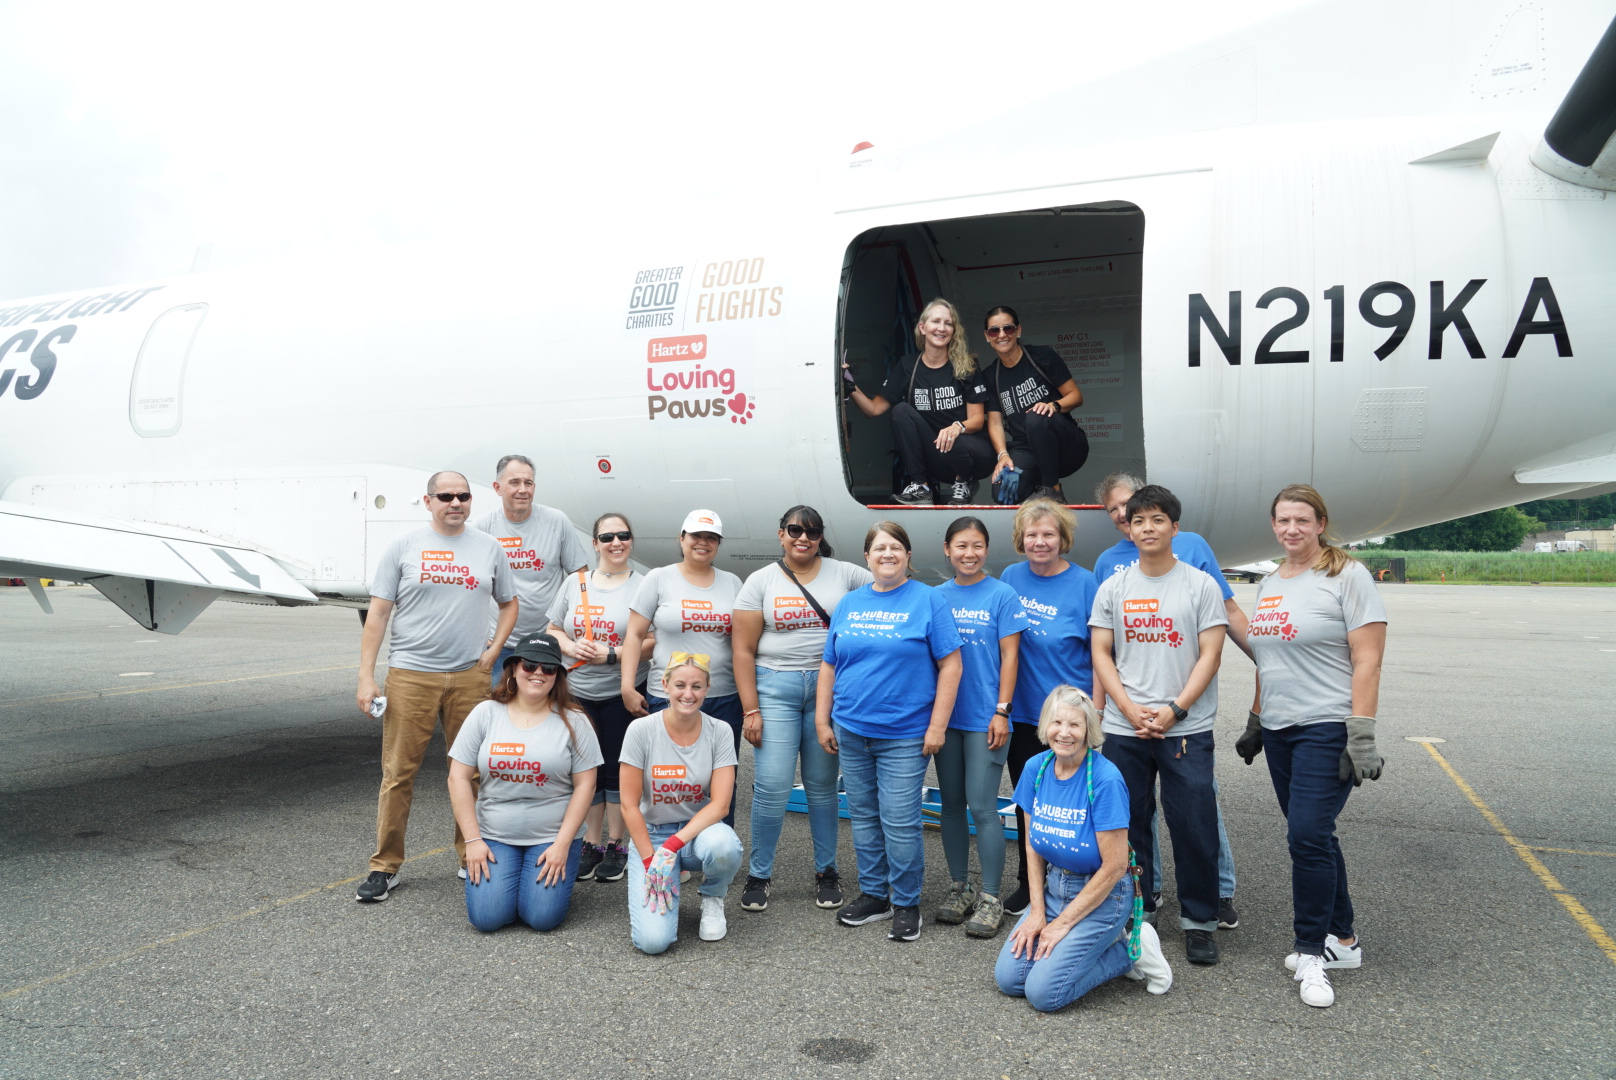 GREATER GOOD CHARITIES AND HARTZ LOVING PAWS AIRLIFT MORE THAN 90 SHELTER PETS 